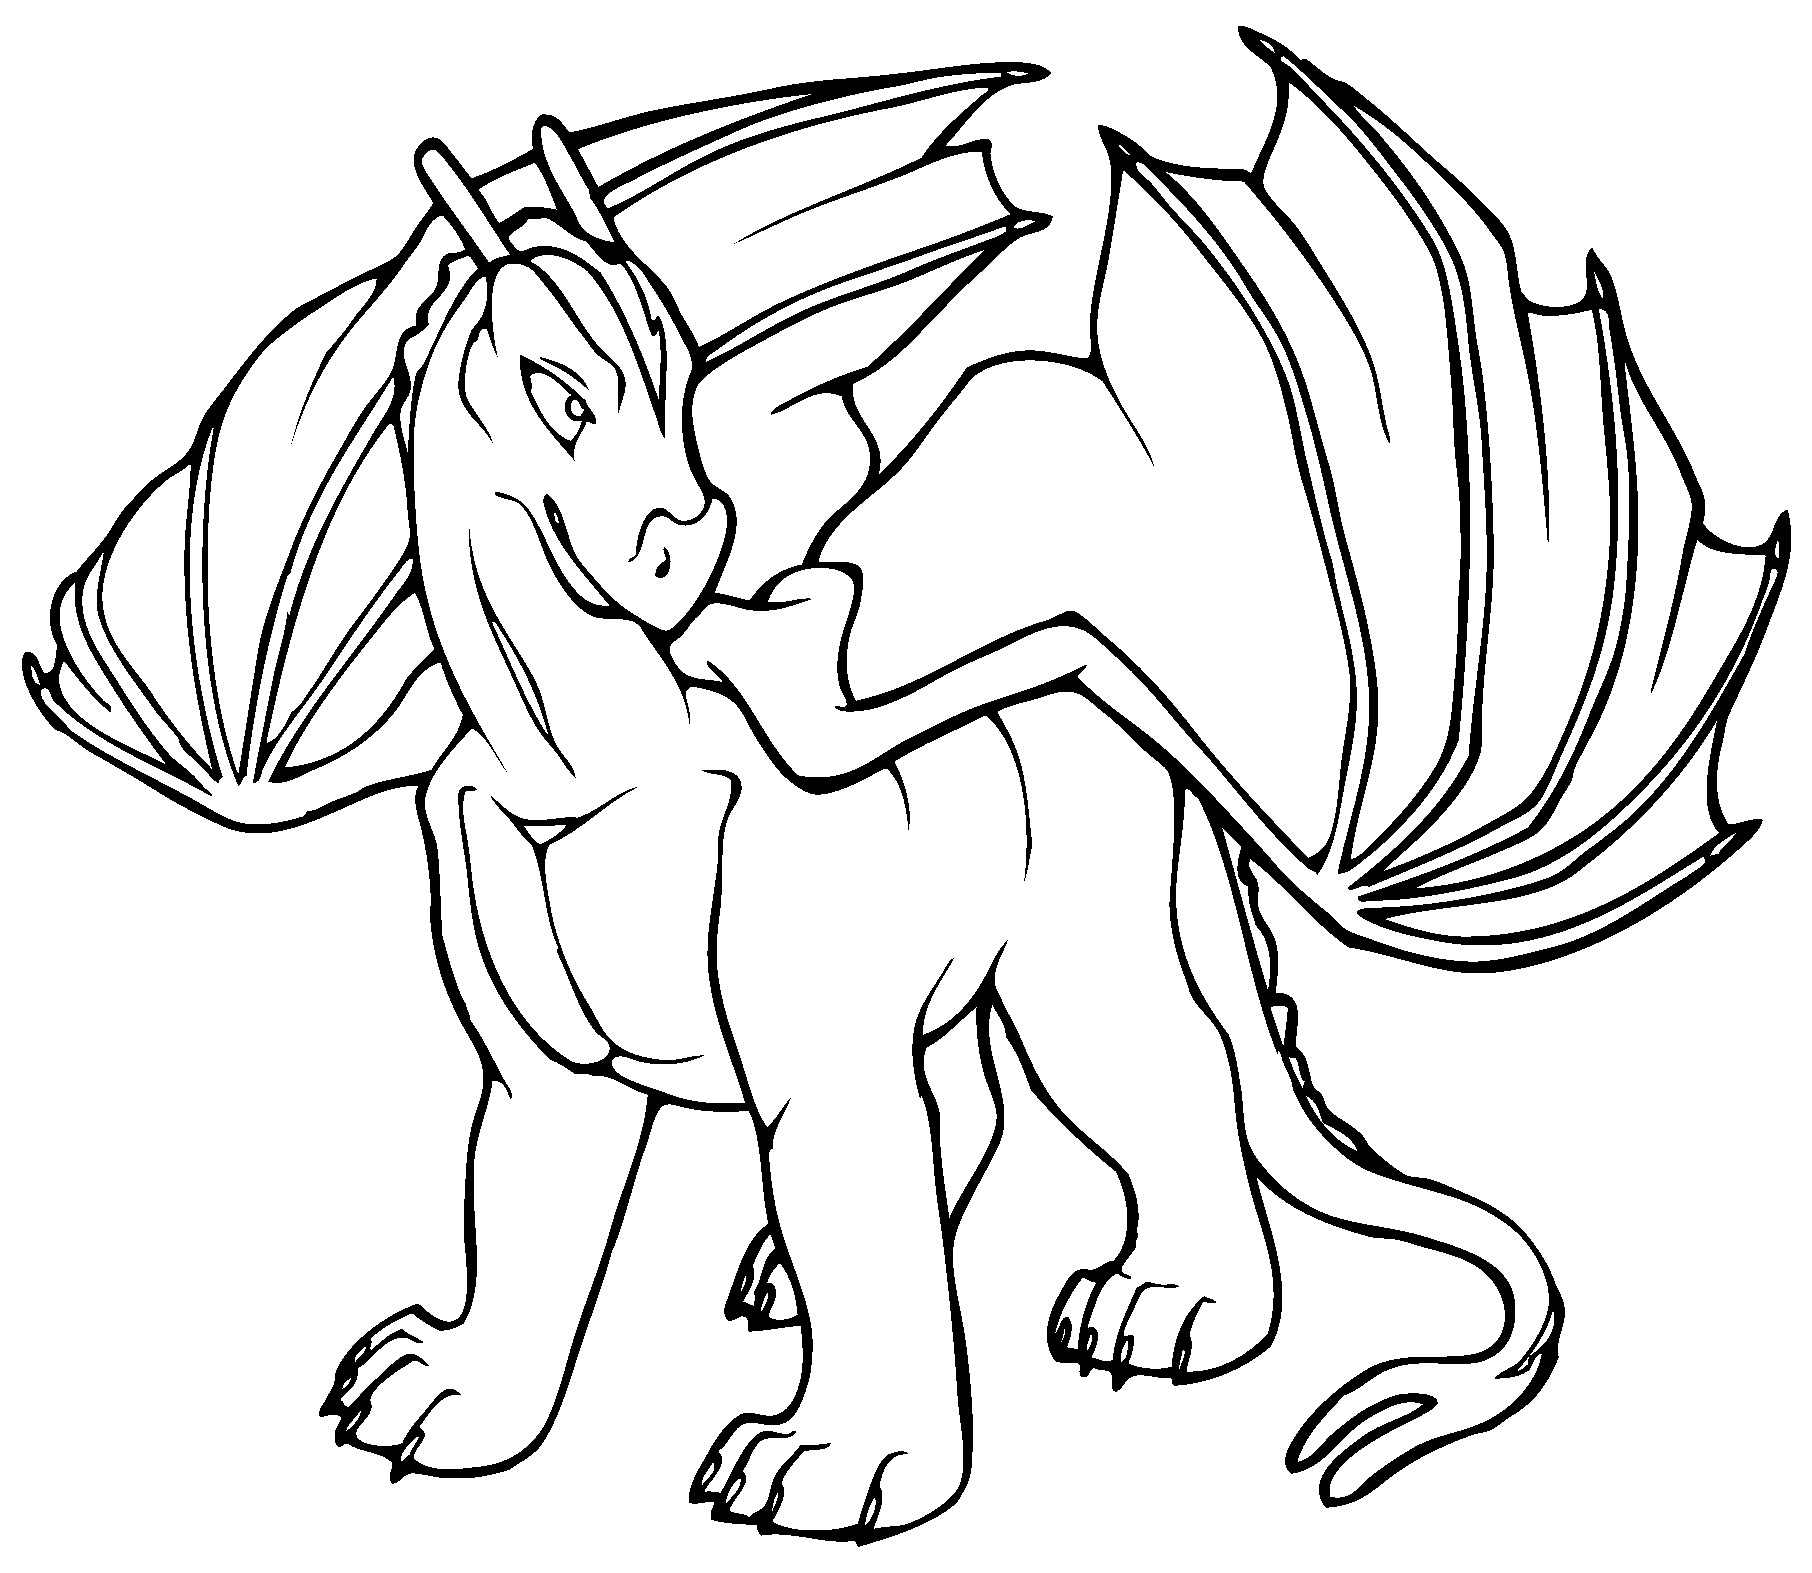 Dragon Coloring Pages Free Printable
 Free Printable Dragon Coloring Pages For Kids